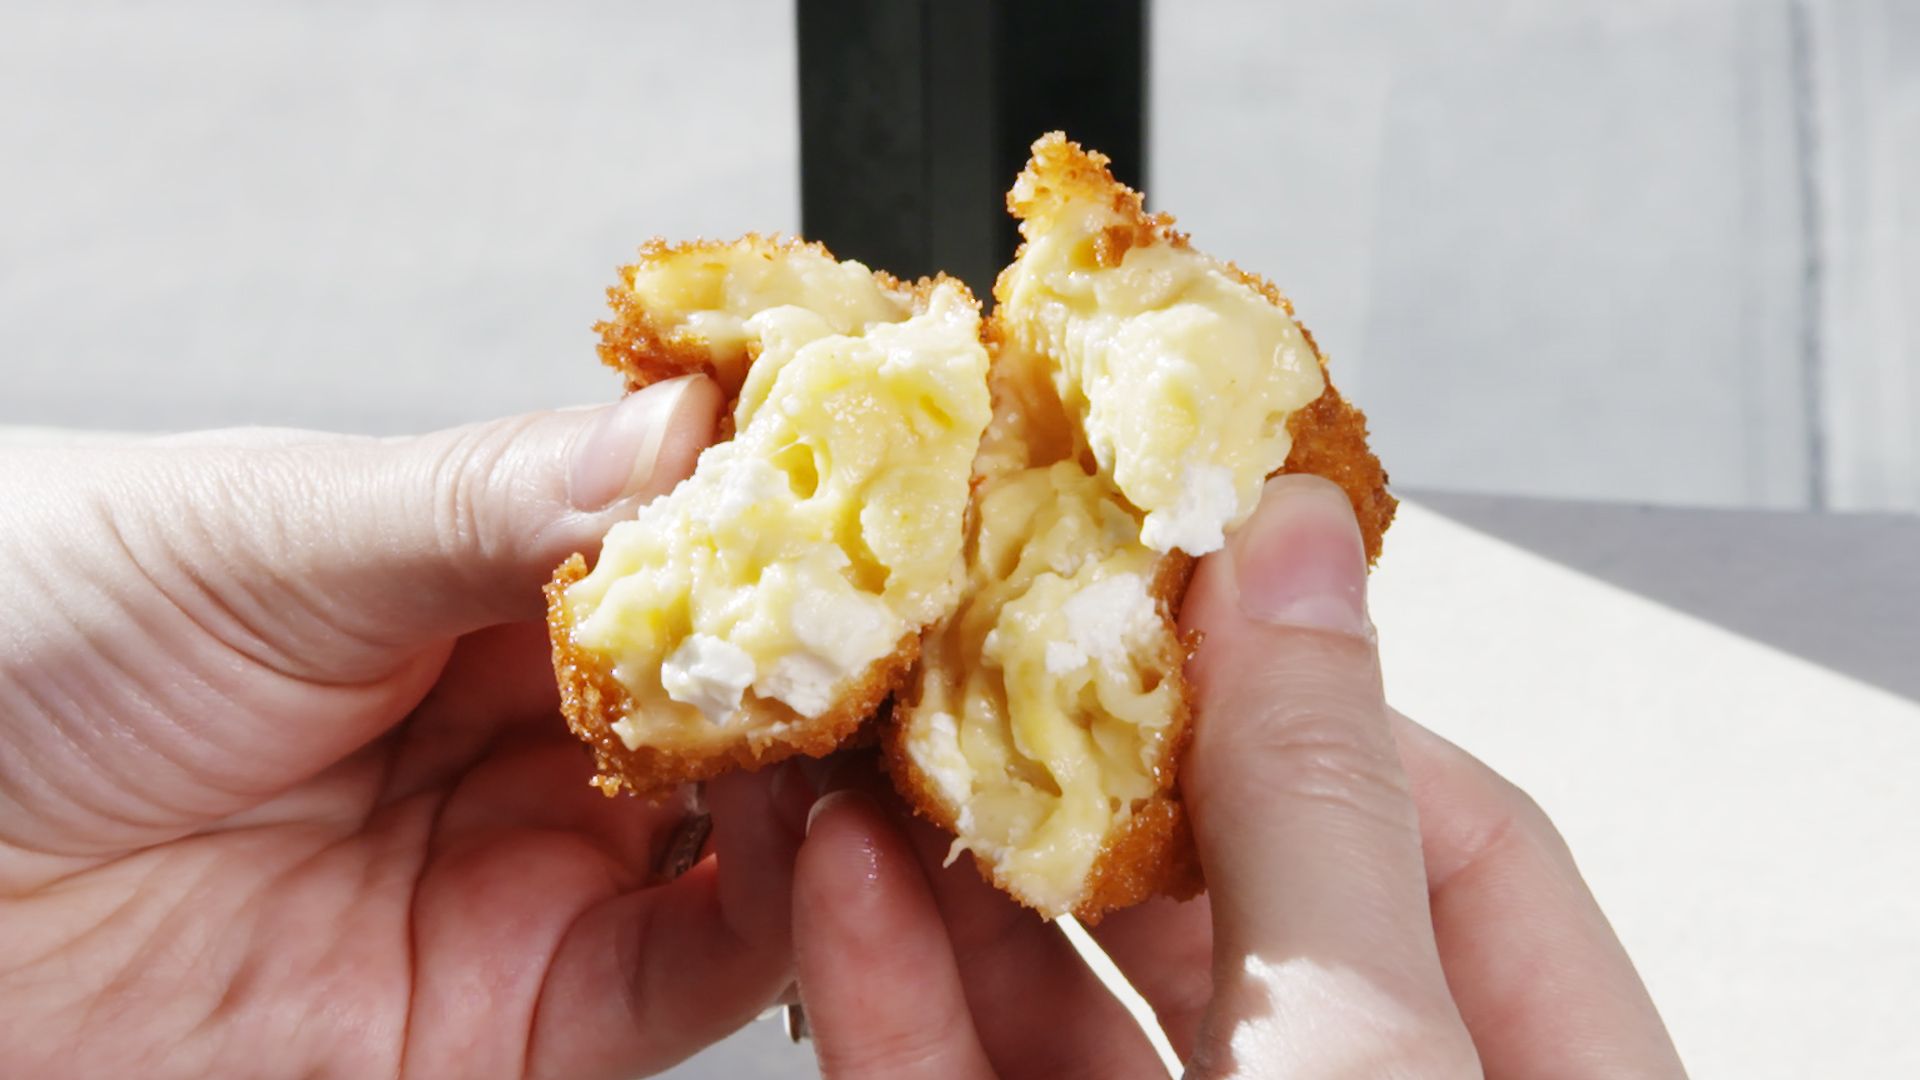 Southern Baked Mac and Cheese - Immaculate Bites